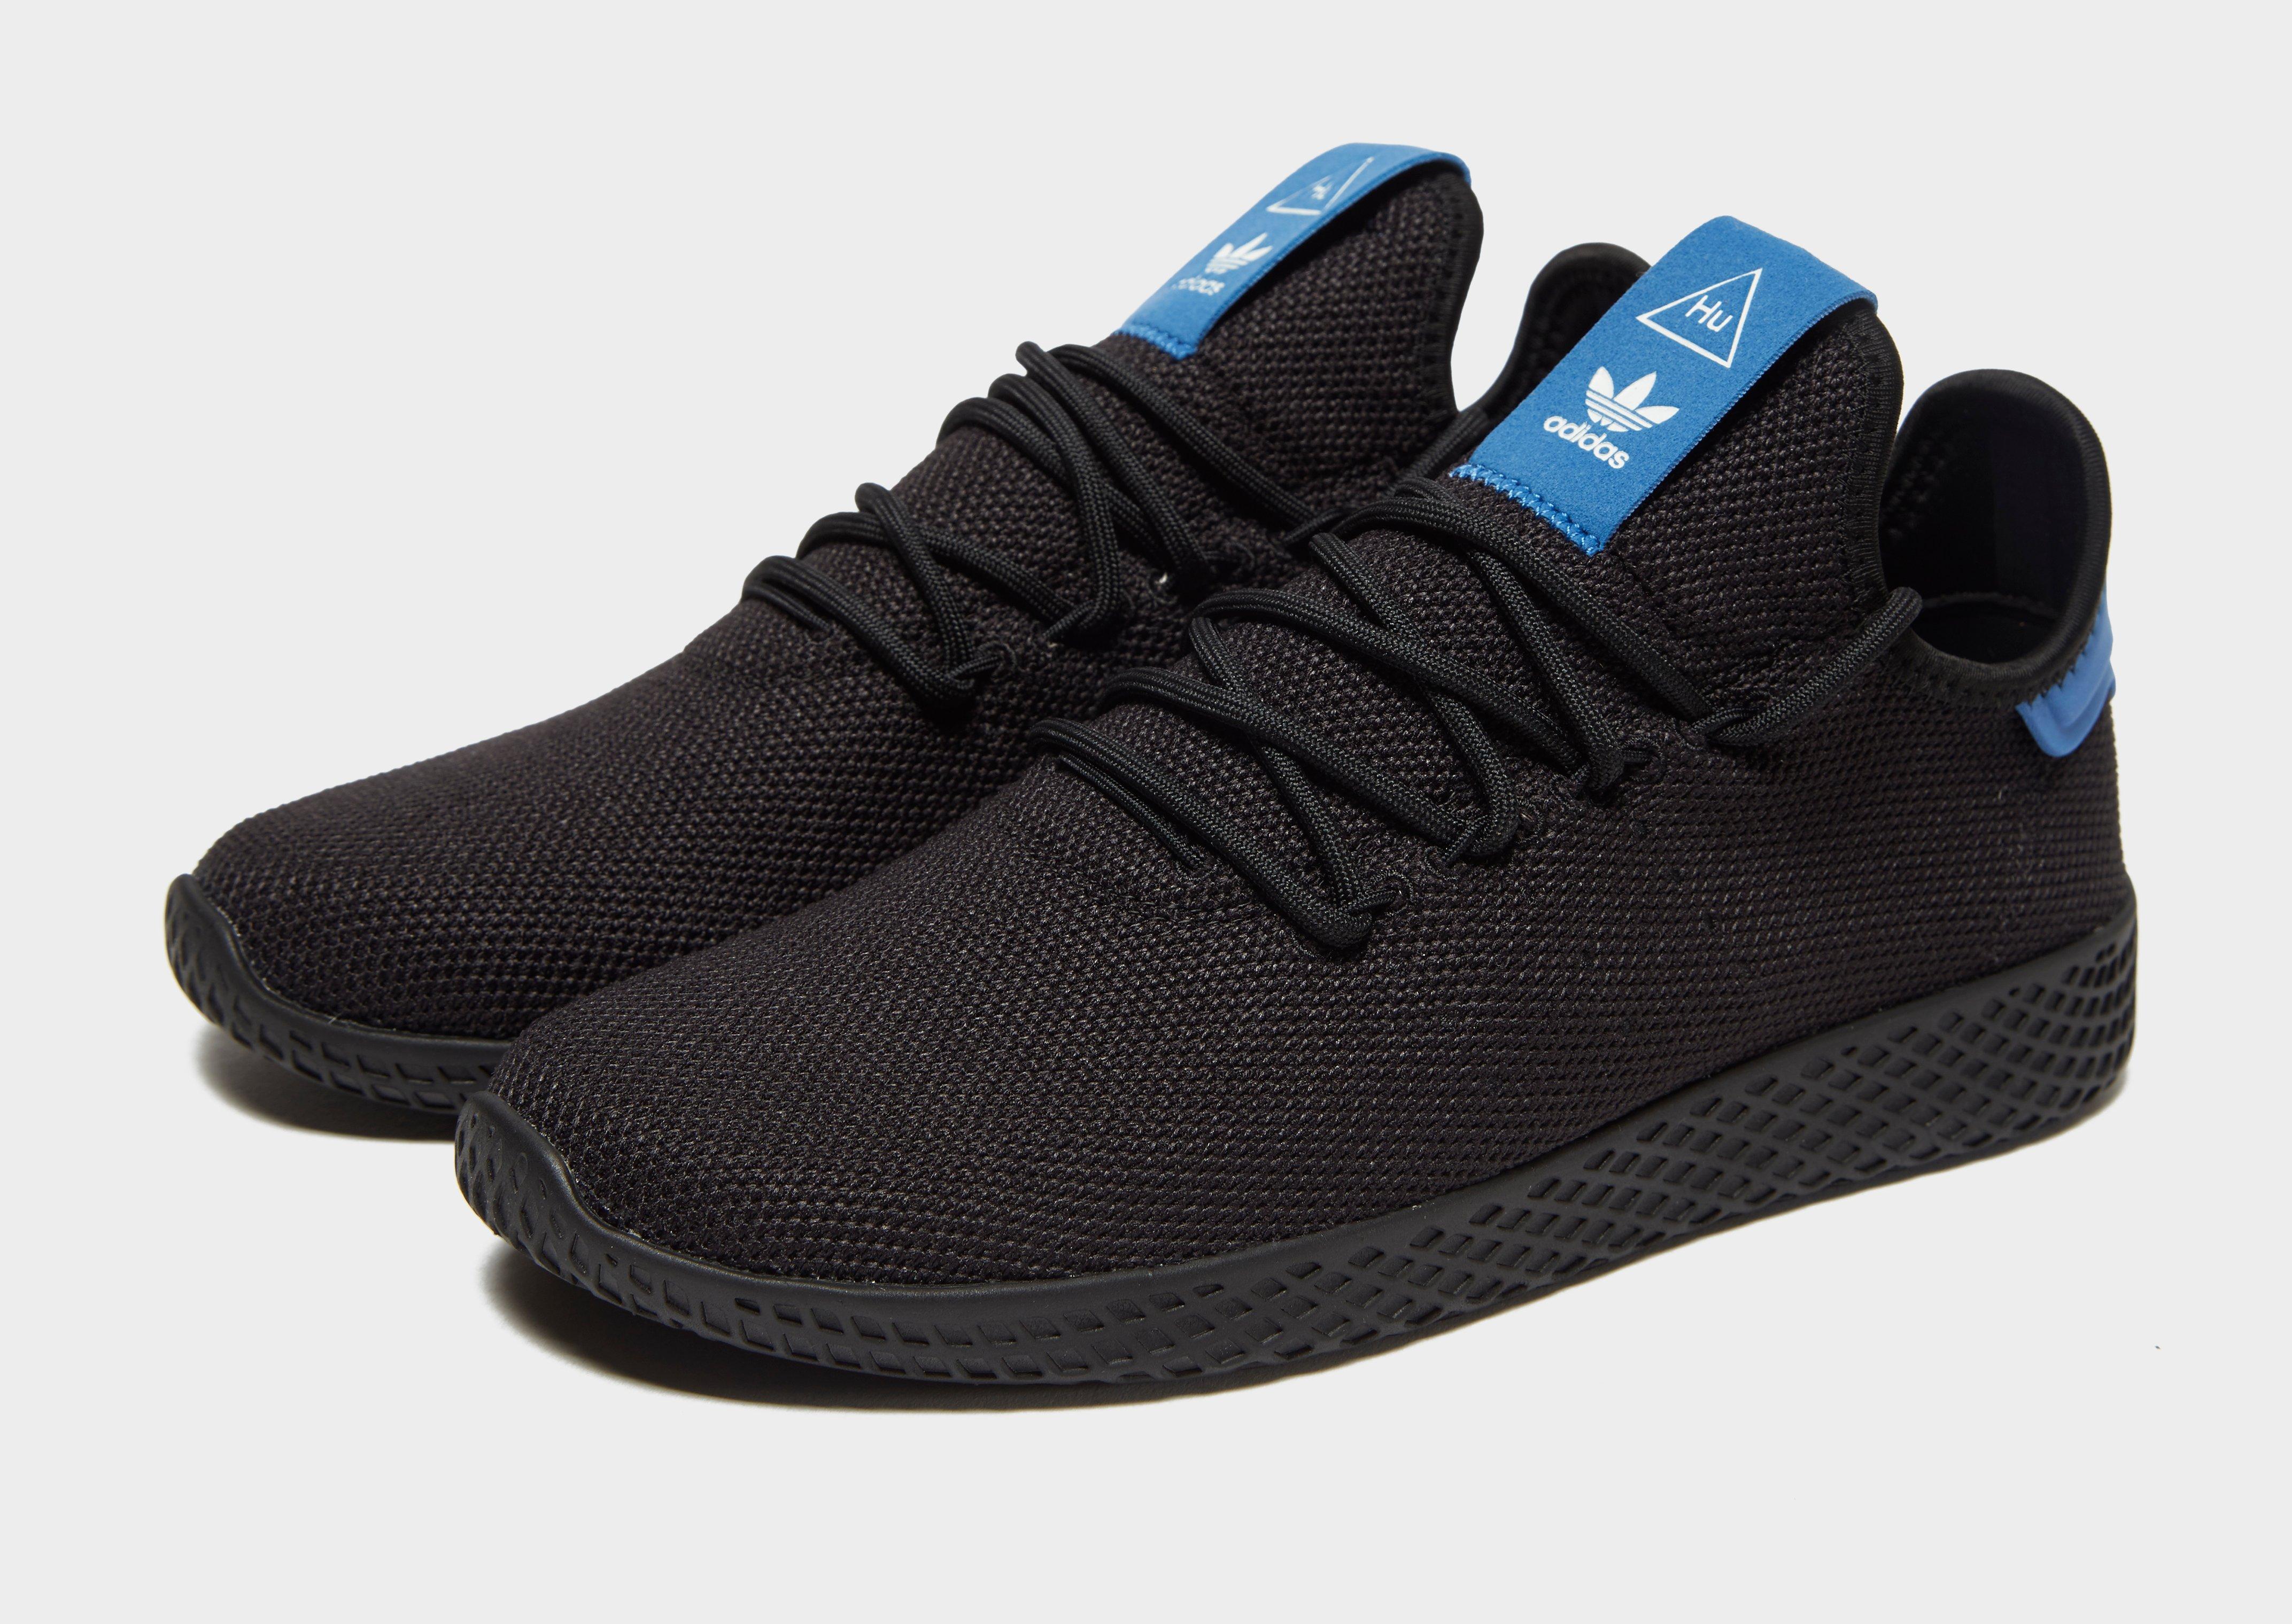 pharrell williams adidas hu black, considerable deal UP TO 55% OFF -  statehouse.gov.sl